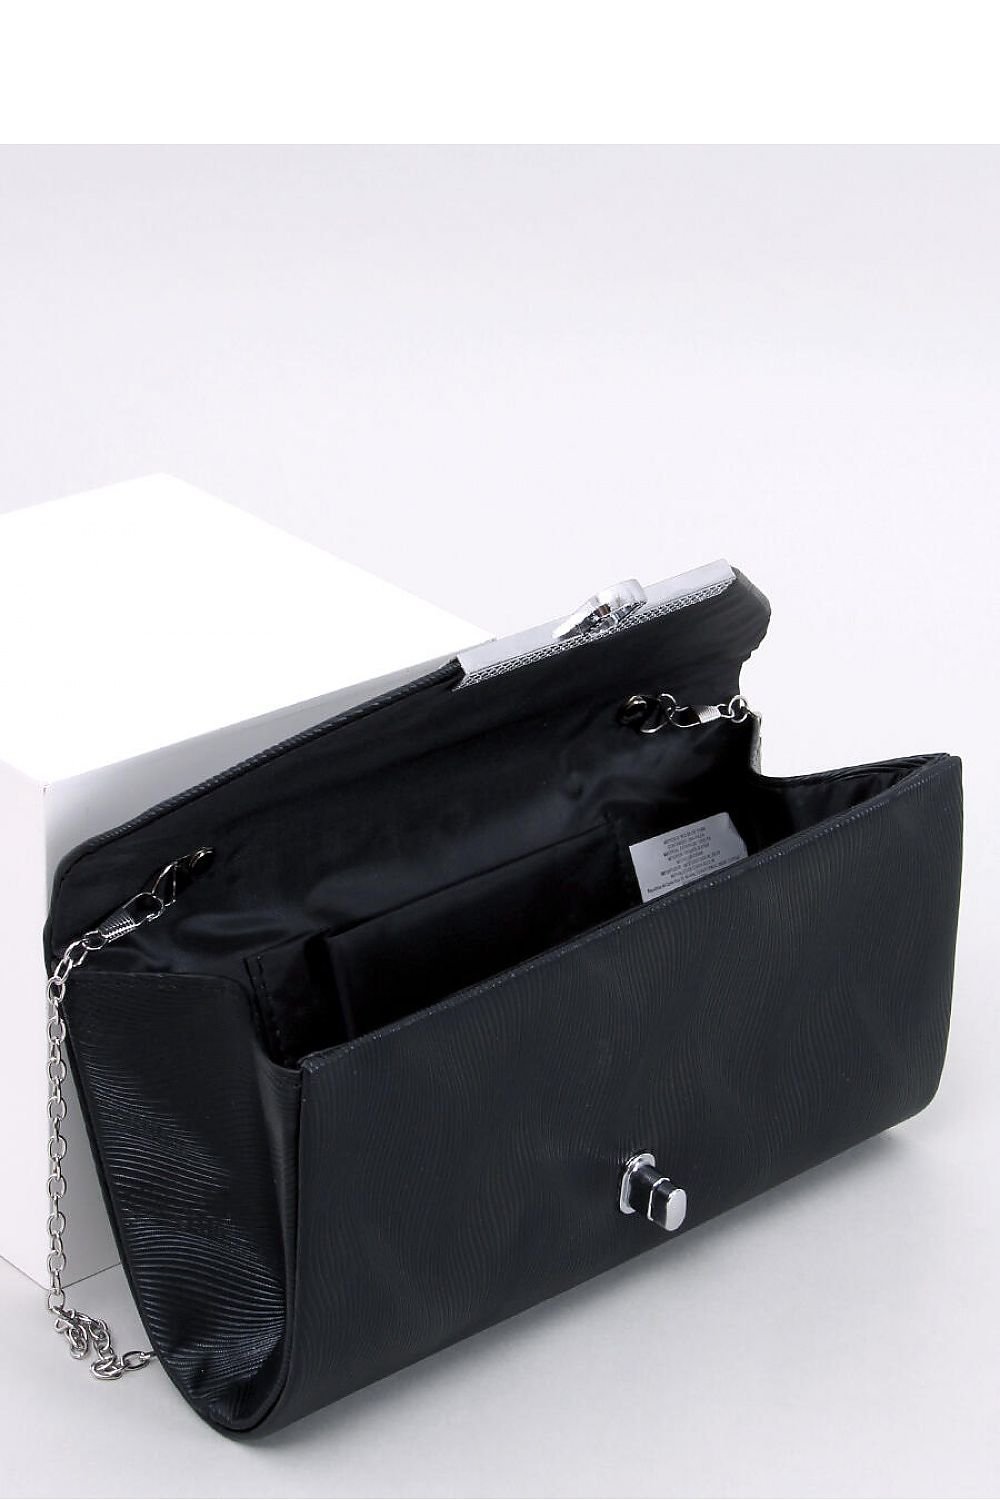 Envelope clutch bag - M&H FashionEnvelope clutch bagM&H FashionM&H Fashion192443_1116835one-size-fits-allEnvelope clutch bag InelloM&H FashionM&H FashionBlack handbag for women ? clutch bag. It can be worn in two ways ? in hand like a clutch bag or on a delicate silver chain. It is fastened with a stylish magnetic clEnvelope clutch bag